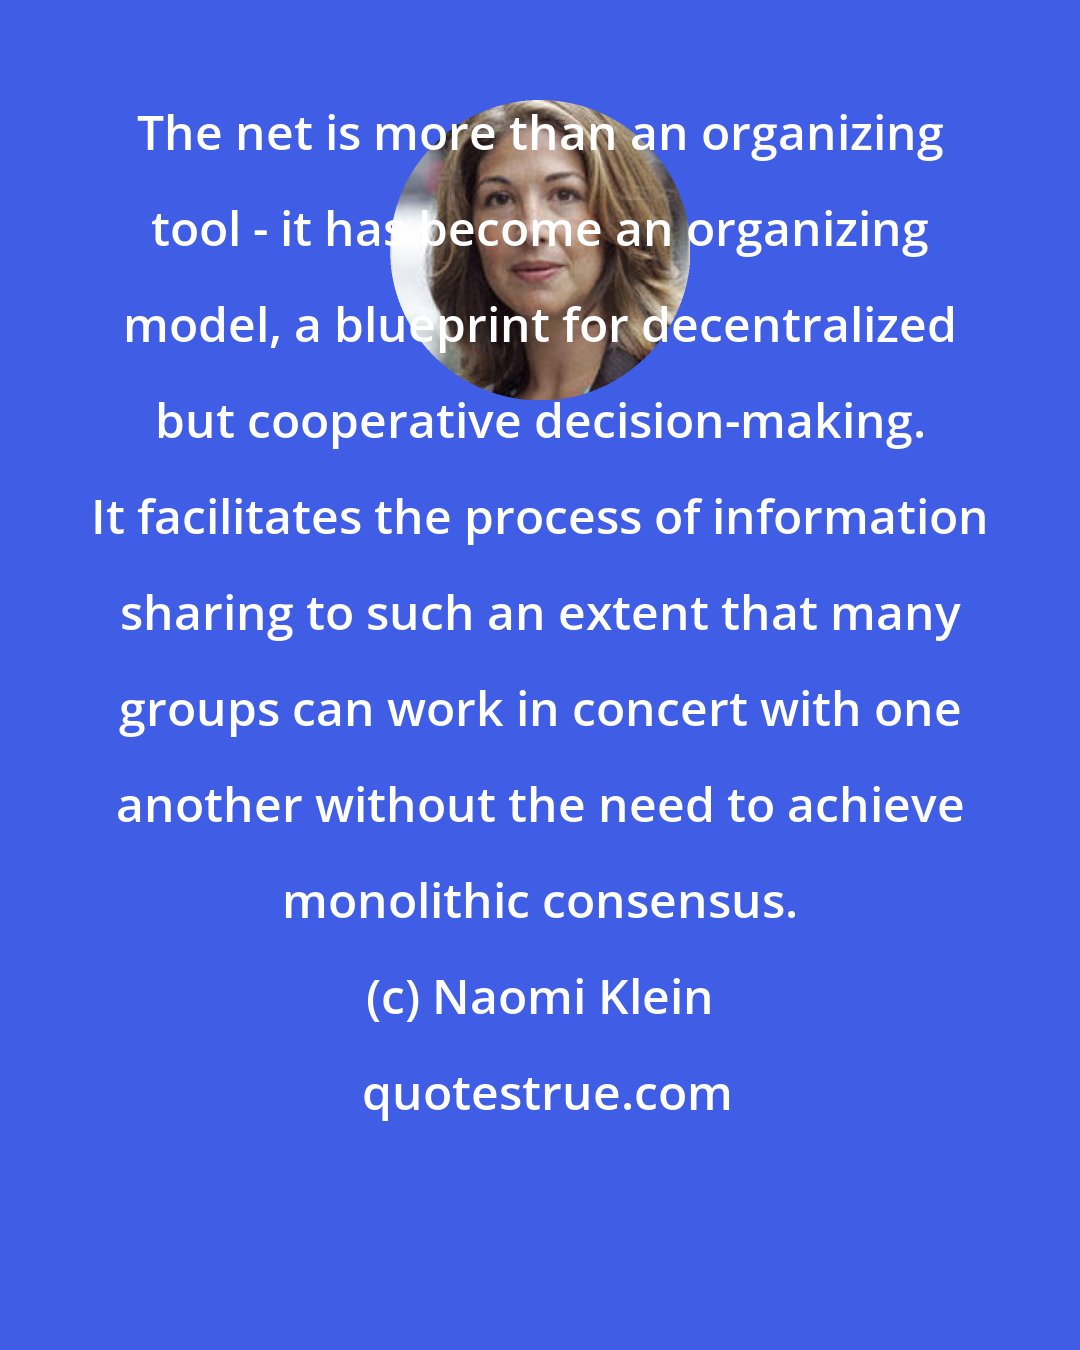 Naomi Klein: The net is more than an organizing tool - it has become an organizing model, a blueprint for decentralized but cooperative decision-making. It facilitates the process of information sharing to such an extent that many groups can work in concert with one another without the need to achieve monolithic consensus.